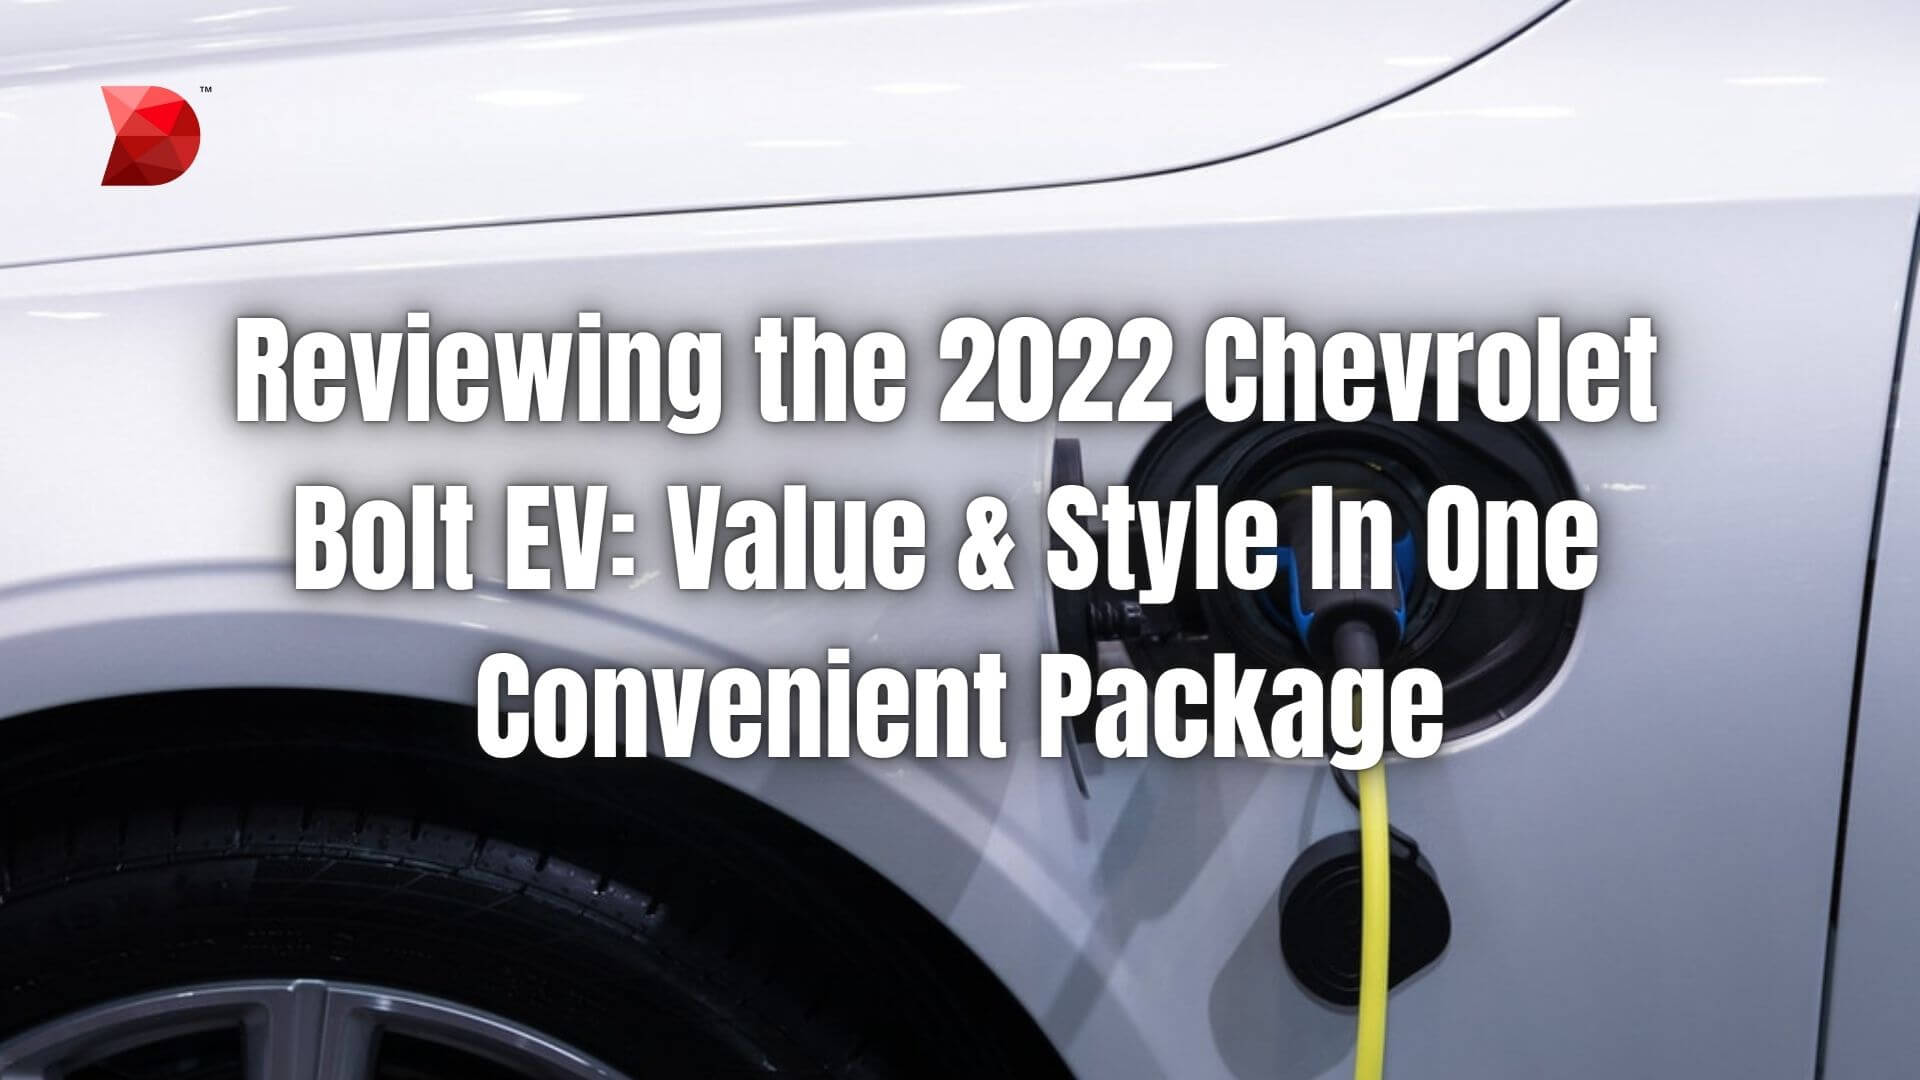 Reviewing the 2022 Chevrolet Bolt EV Value & Style In One Convenient Package